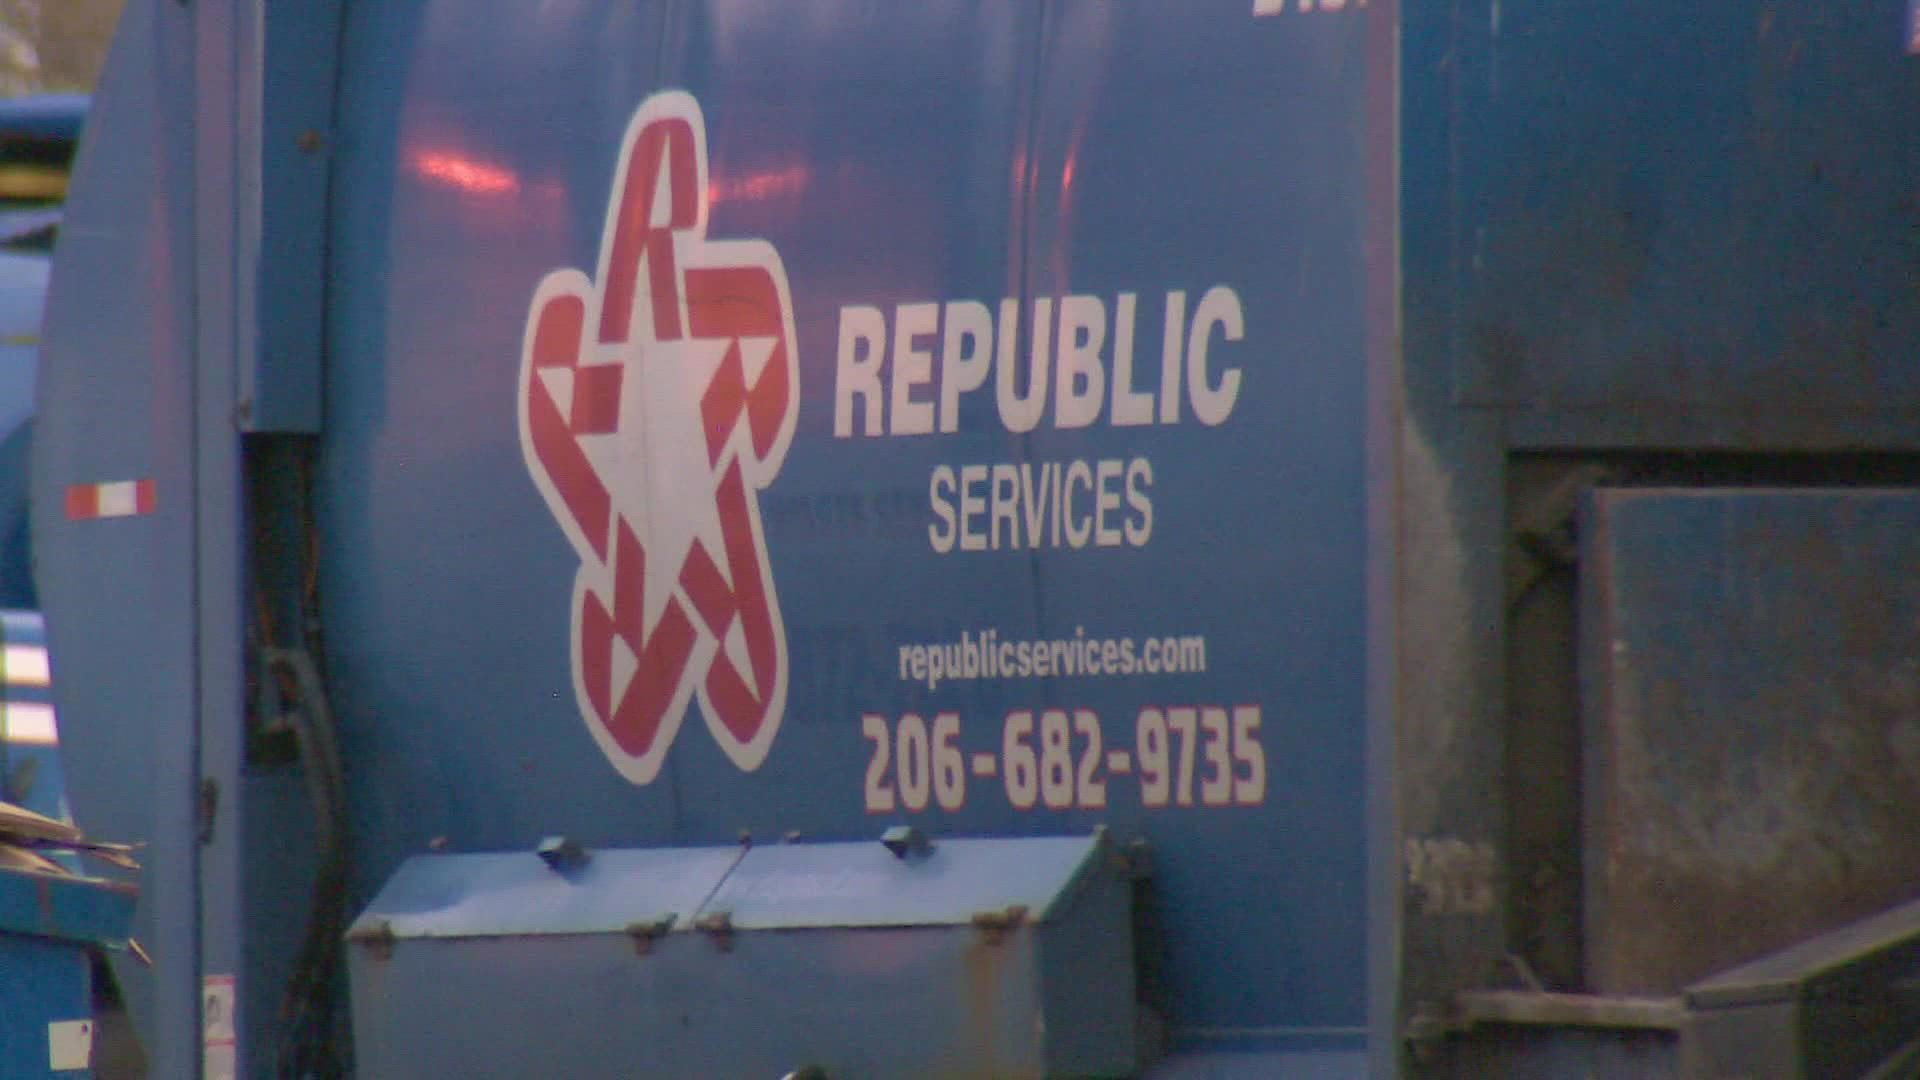 Republic Services drivers in the Seattle area went on a "work stoppage" to support drivers striking in San Diego.